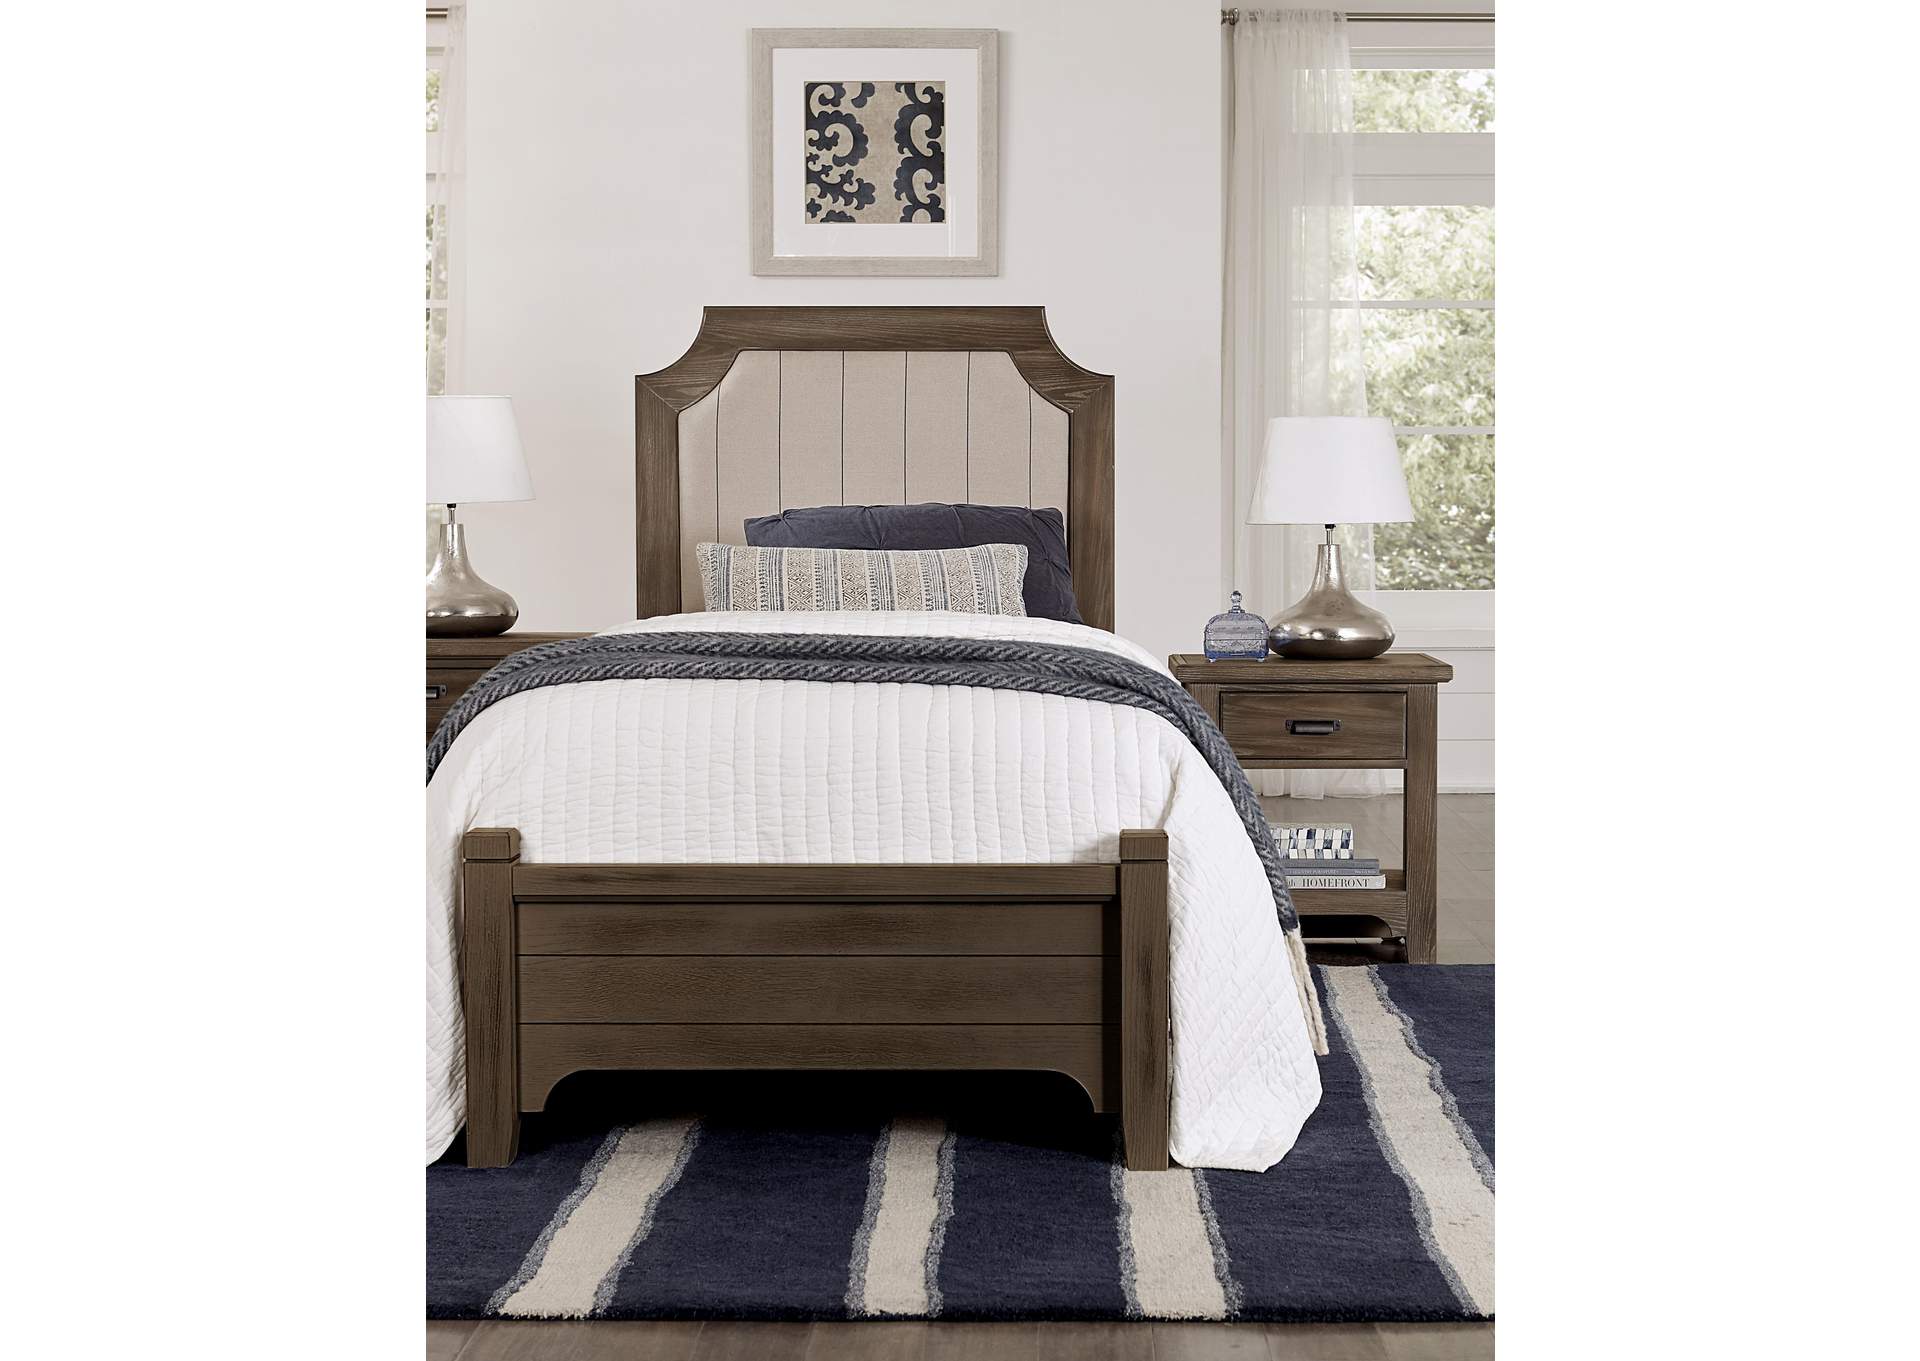 Bungalow Cararra Upholstered Full Bed w/Dresser and Mirror,Vaughan-Bassett